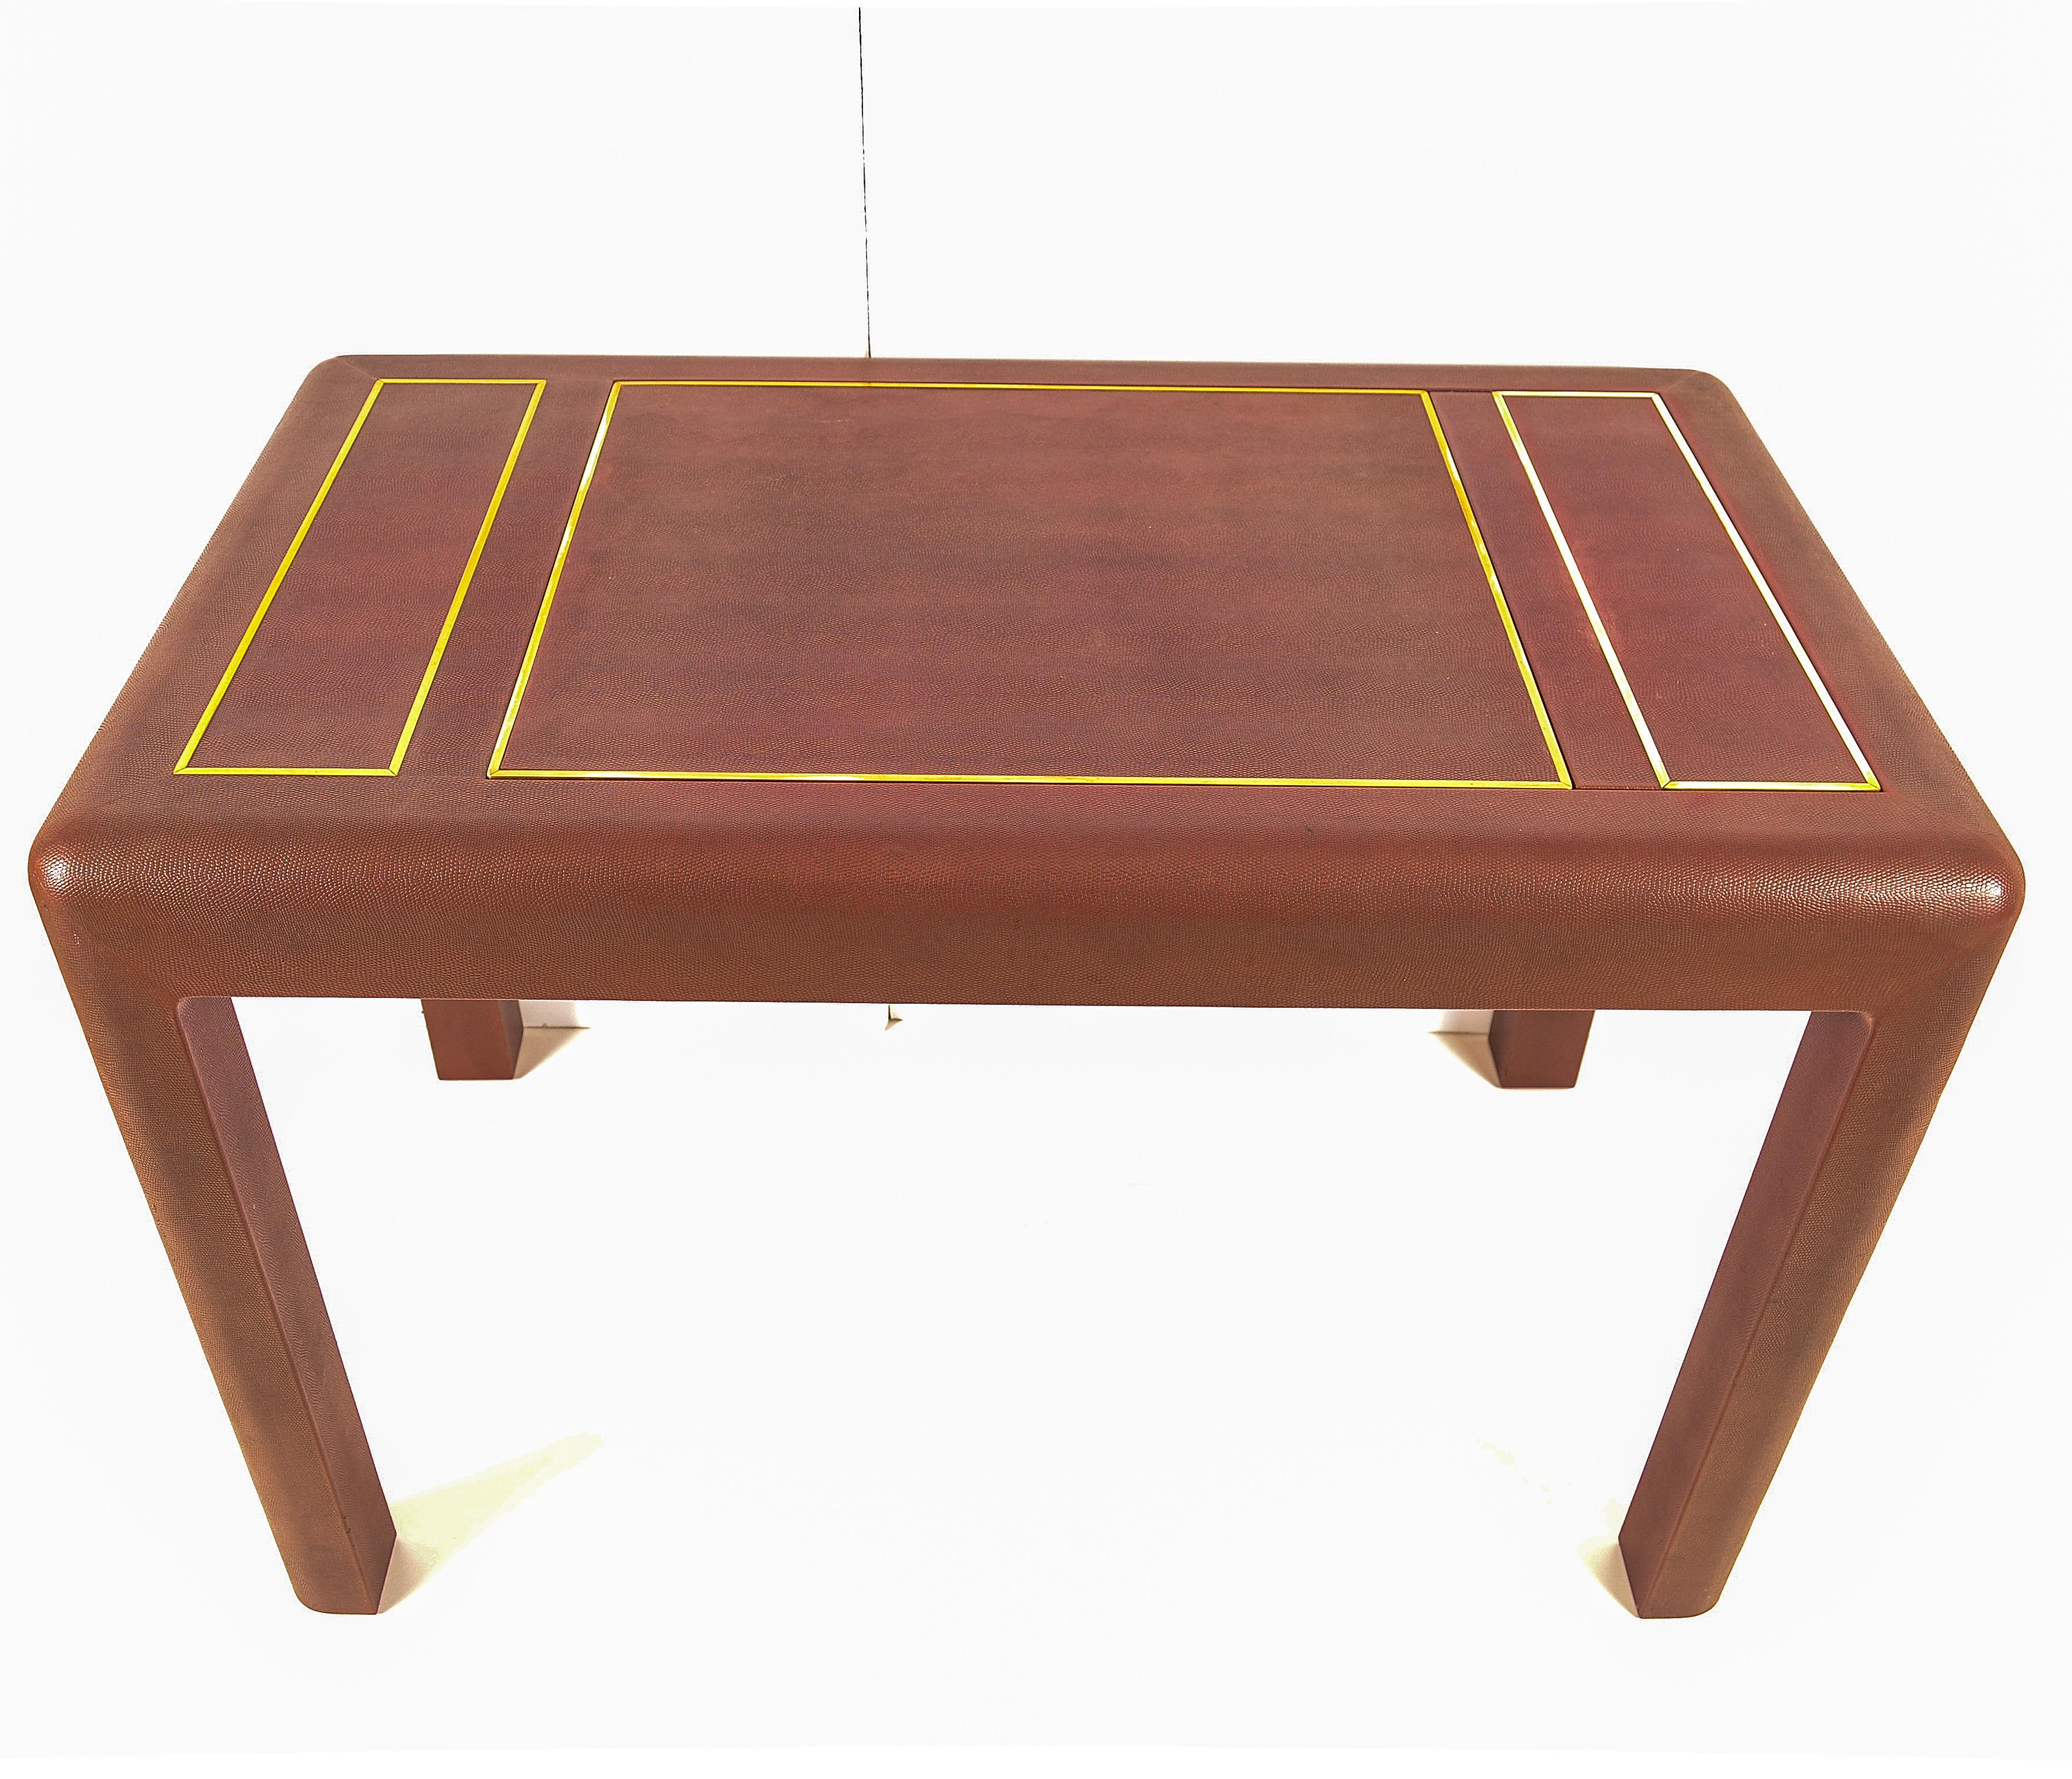 A most elegant game table covered in textured leather in an attractive cordovan color, with brass accents. Made with the unparalleled attention to detail and quality construction that made Karl Springer a design icon. The center panel pops up by